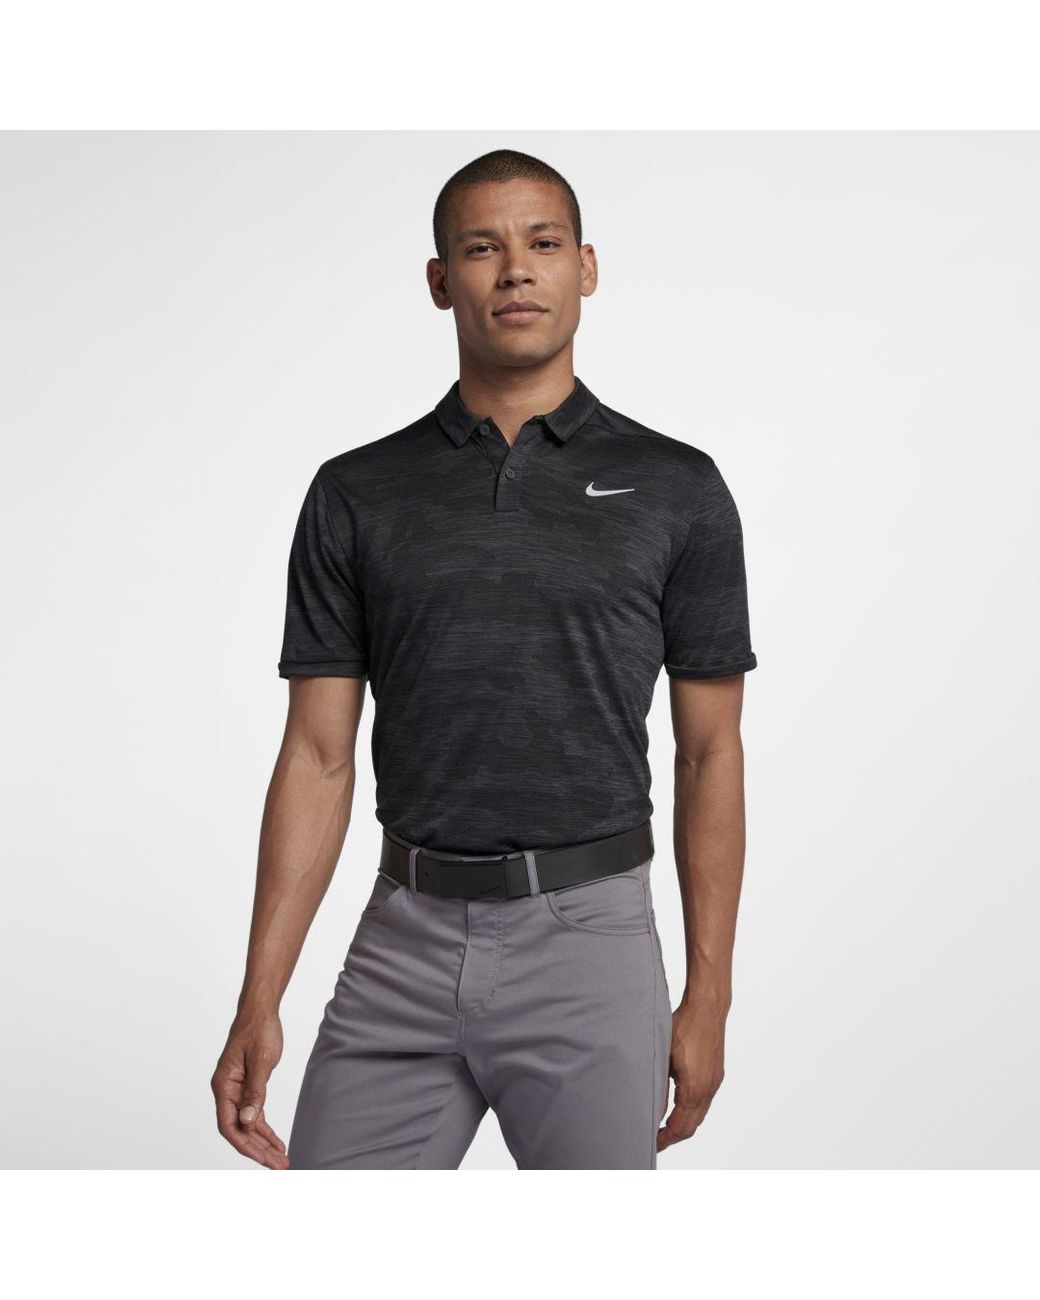 Nike Zonal Cooling Golf Polo in for Men